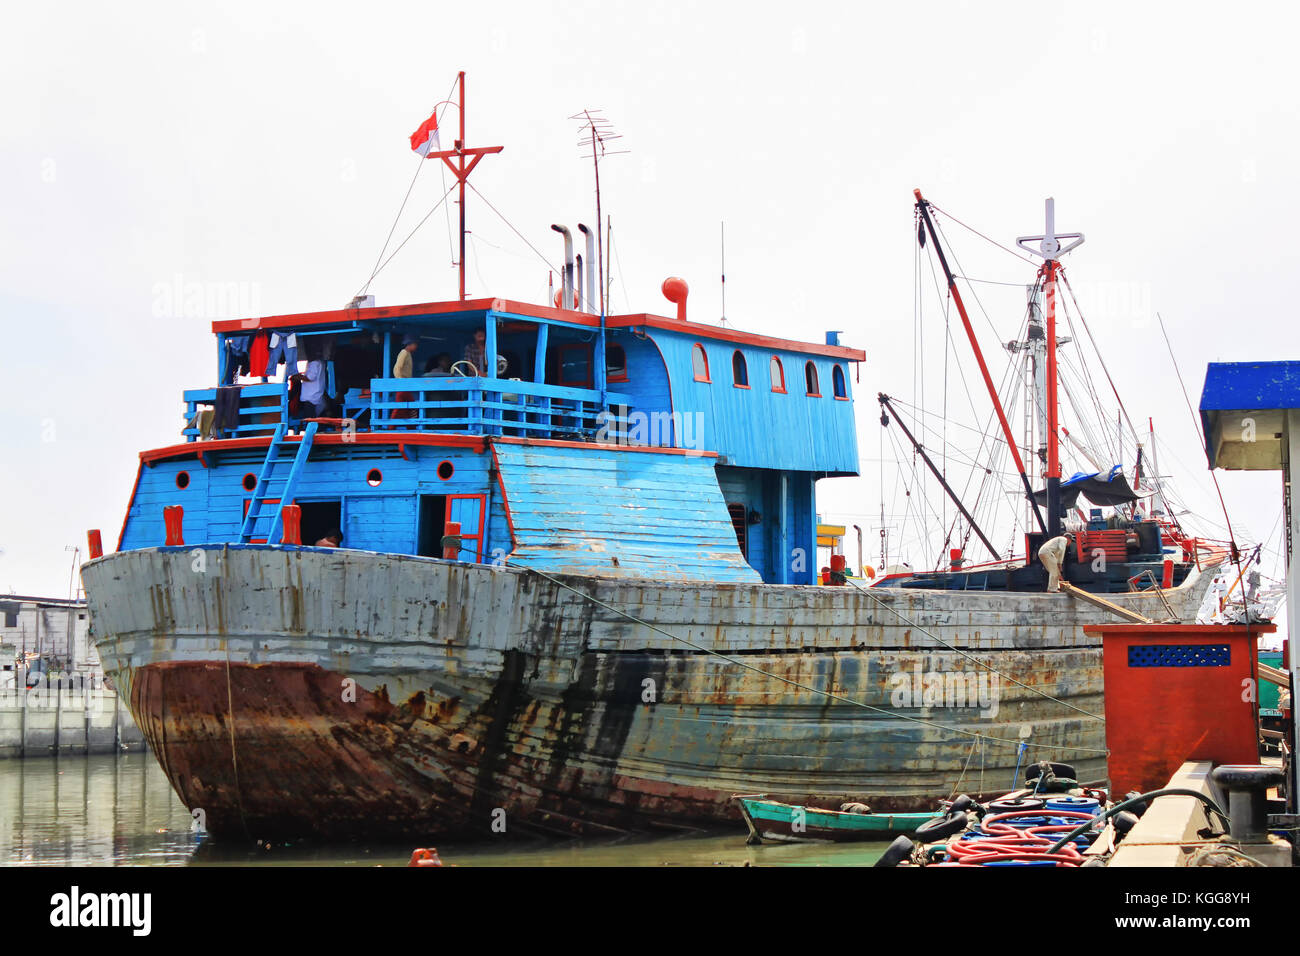 Colorful rusty phinisi ship in harbor with fishermen on board. Sunda Kelapa Harbor, Jakarta, Indonesia. Blue and red colored rusty, old Phinisi ship. Stock Photo